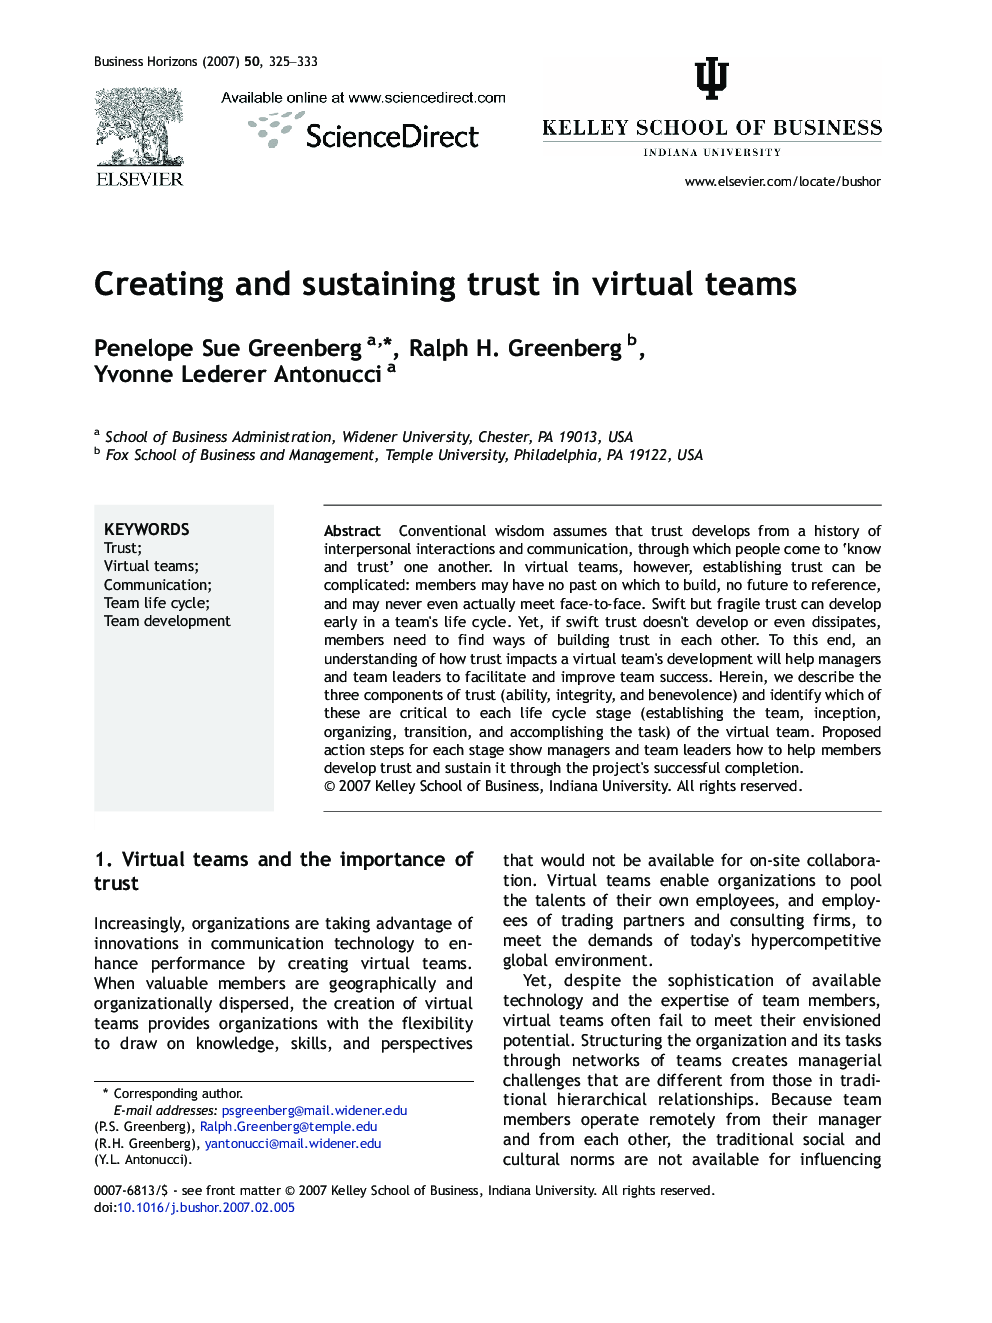 Creating and sustaining trust in virtual teams